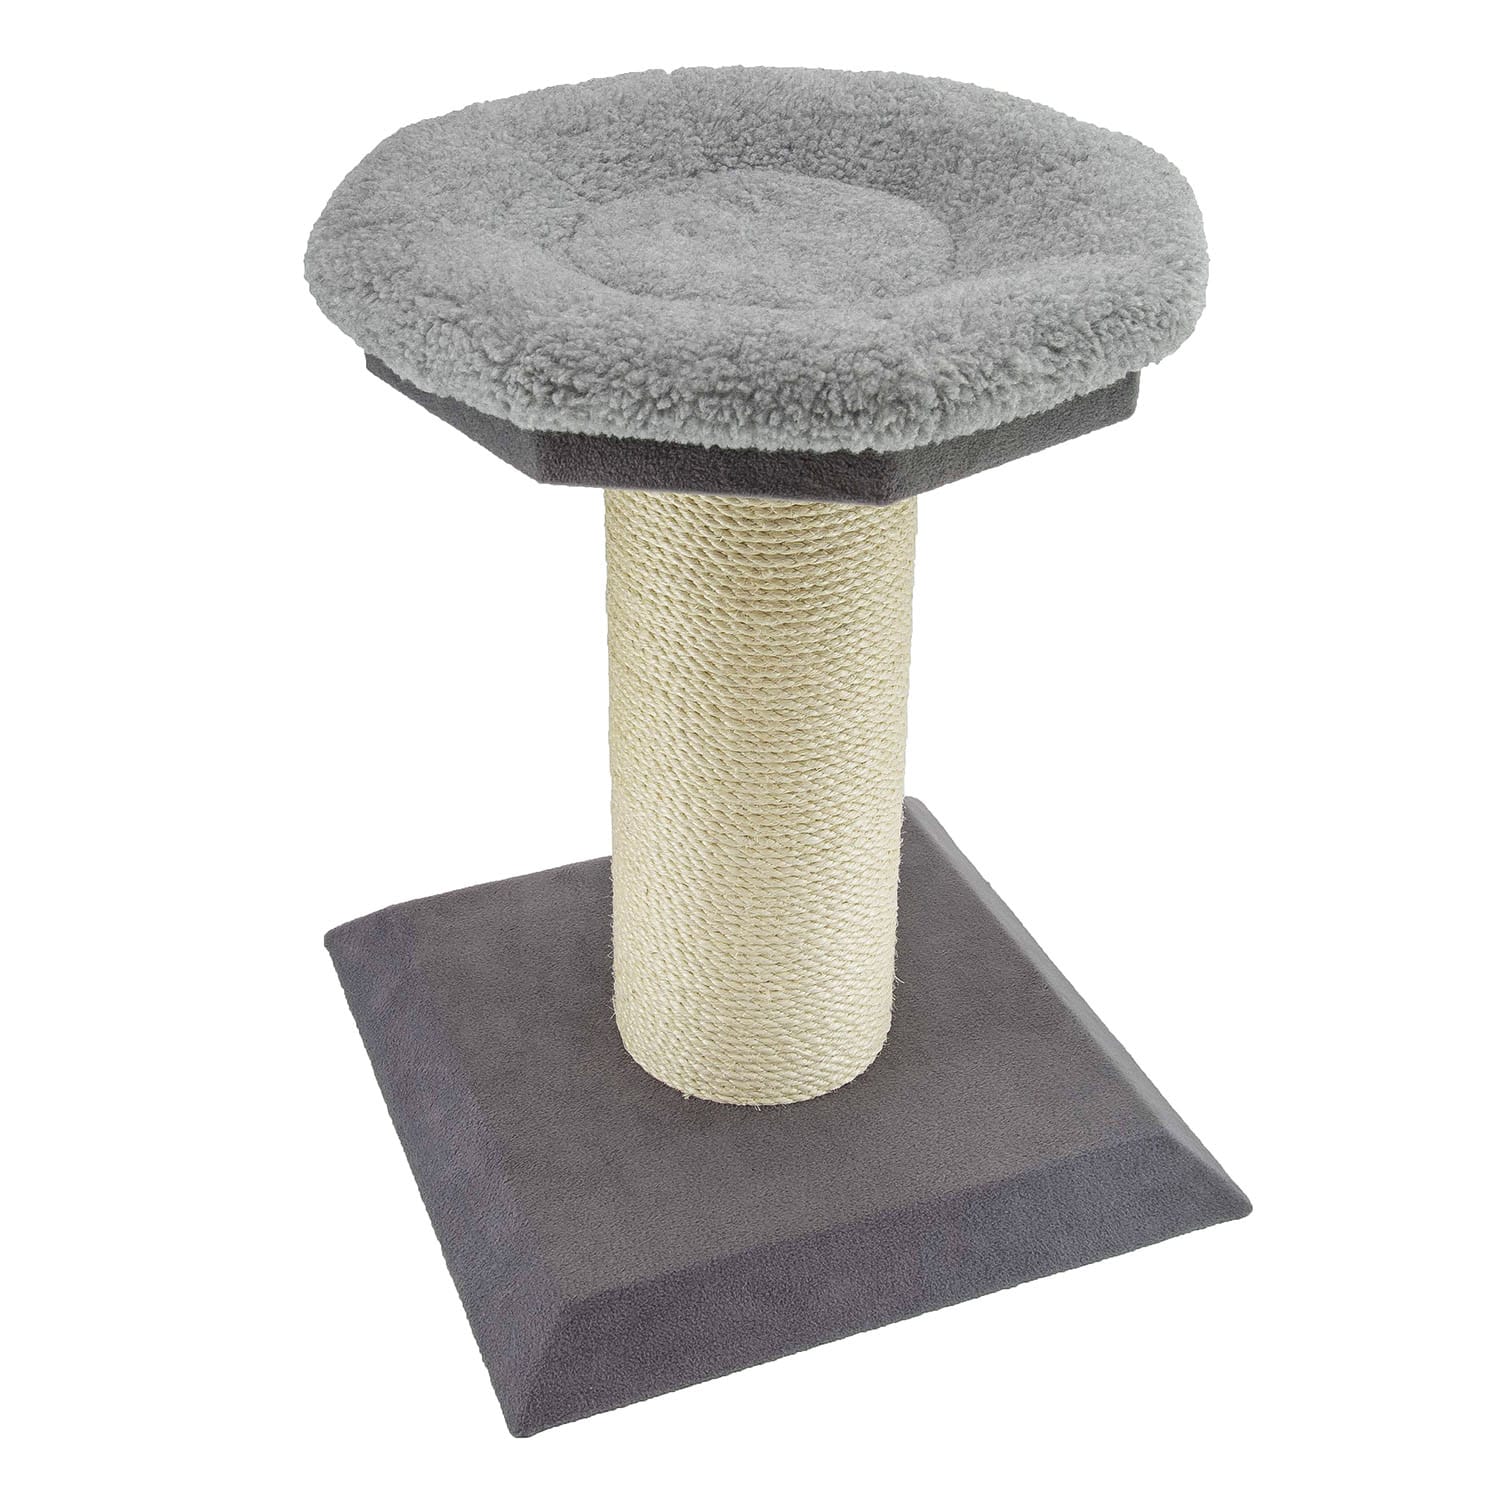 Chunky Hygge Tower | buy cat tower scratching posts online | chunky Hygge tower online shop uk - Cosy Posts